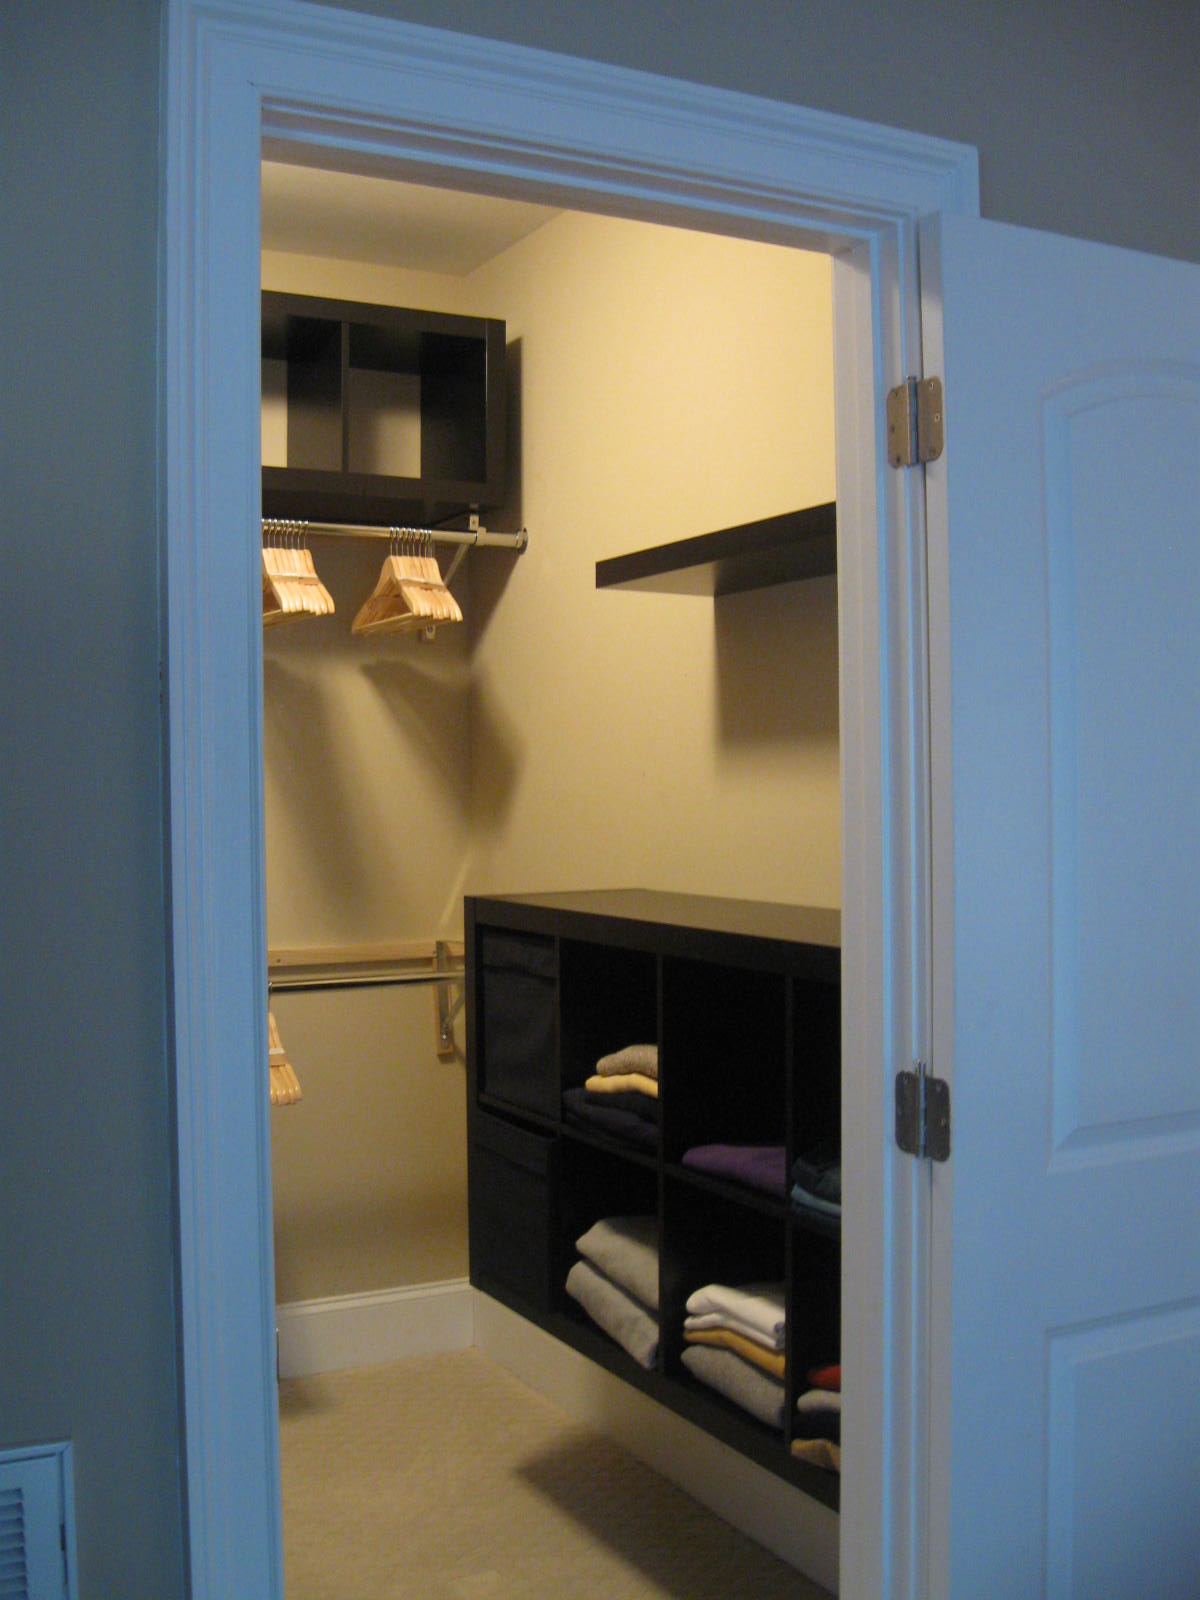 Expedit Closet - Small Walk-in ~ Get Home Decorating